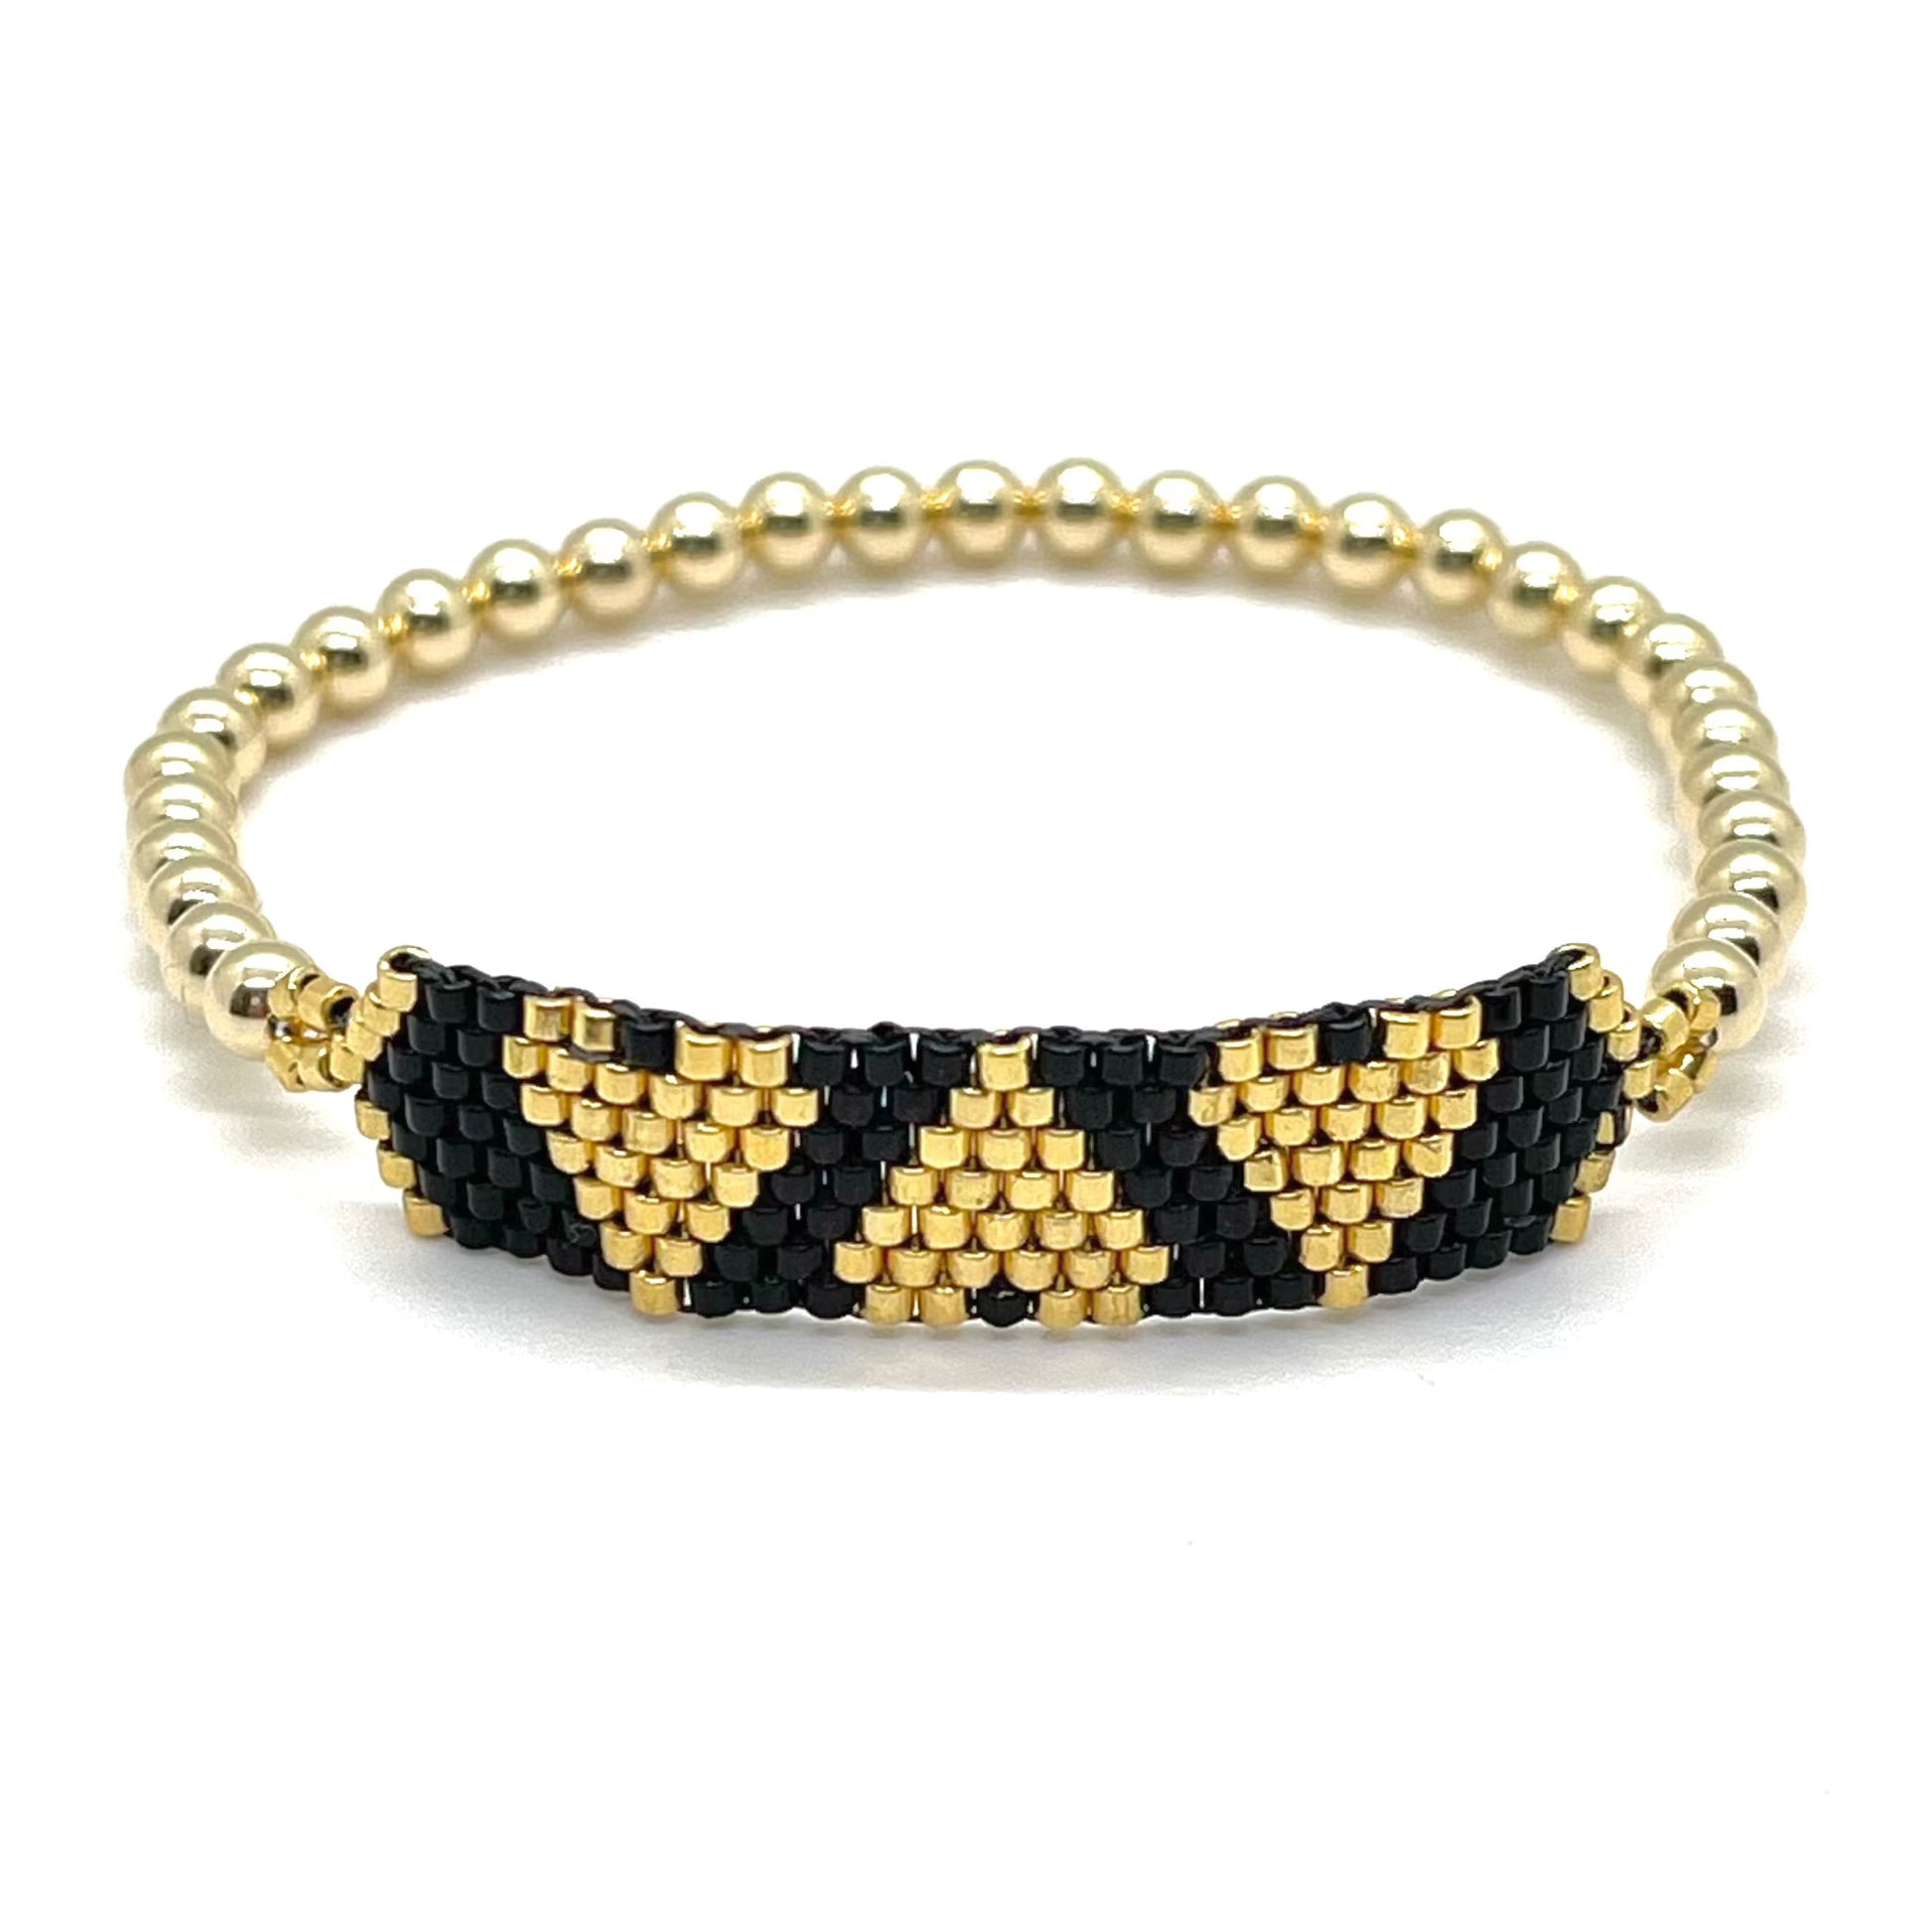 Gold and black woven beaded triple heart band on a 4mm 14K gold-filled ball stretch bracelet. Waterproof and non tarnishing.